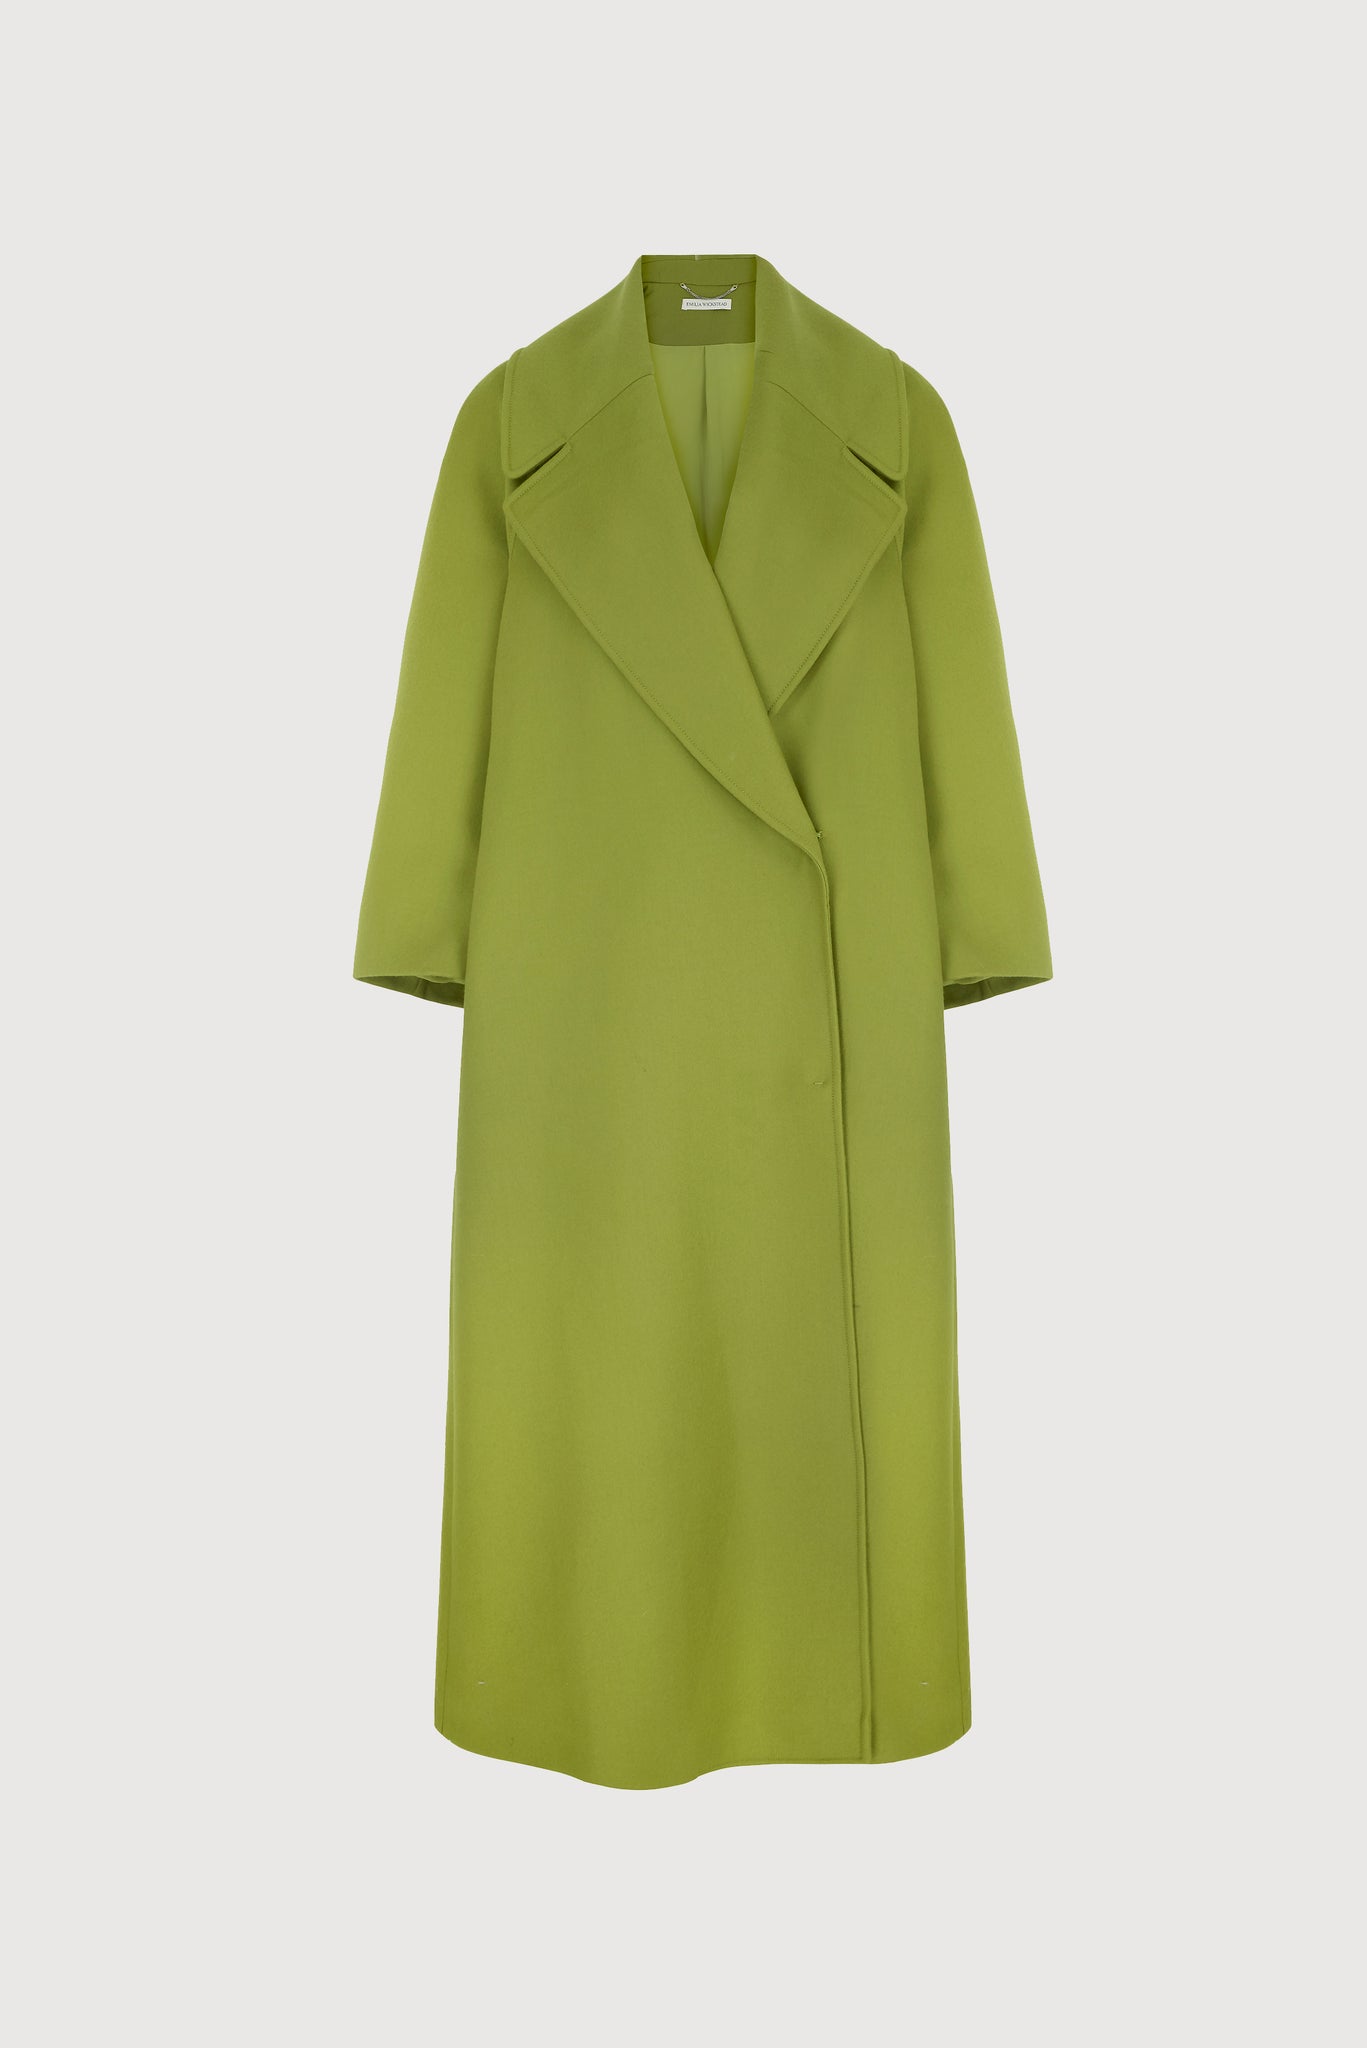 Lupo Chartreuse Flanella Oversized Belted Coat | Emilia Wickstead